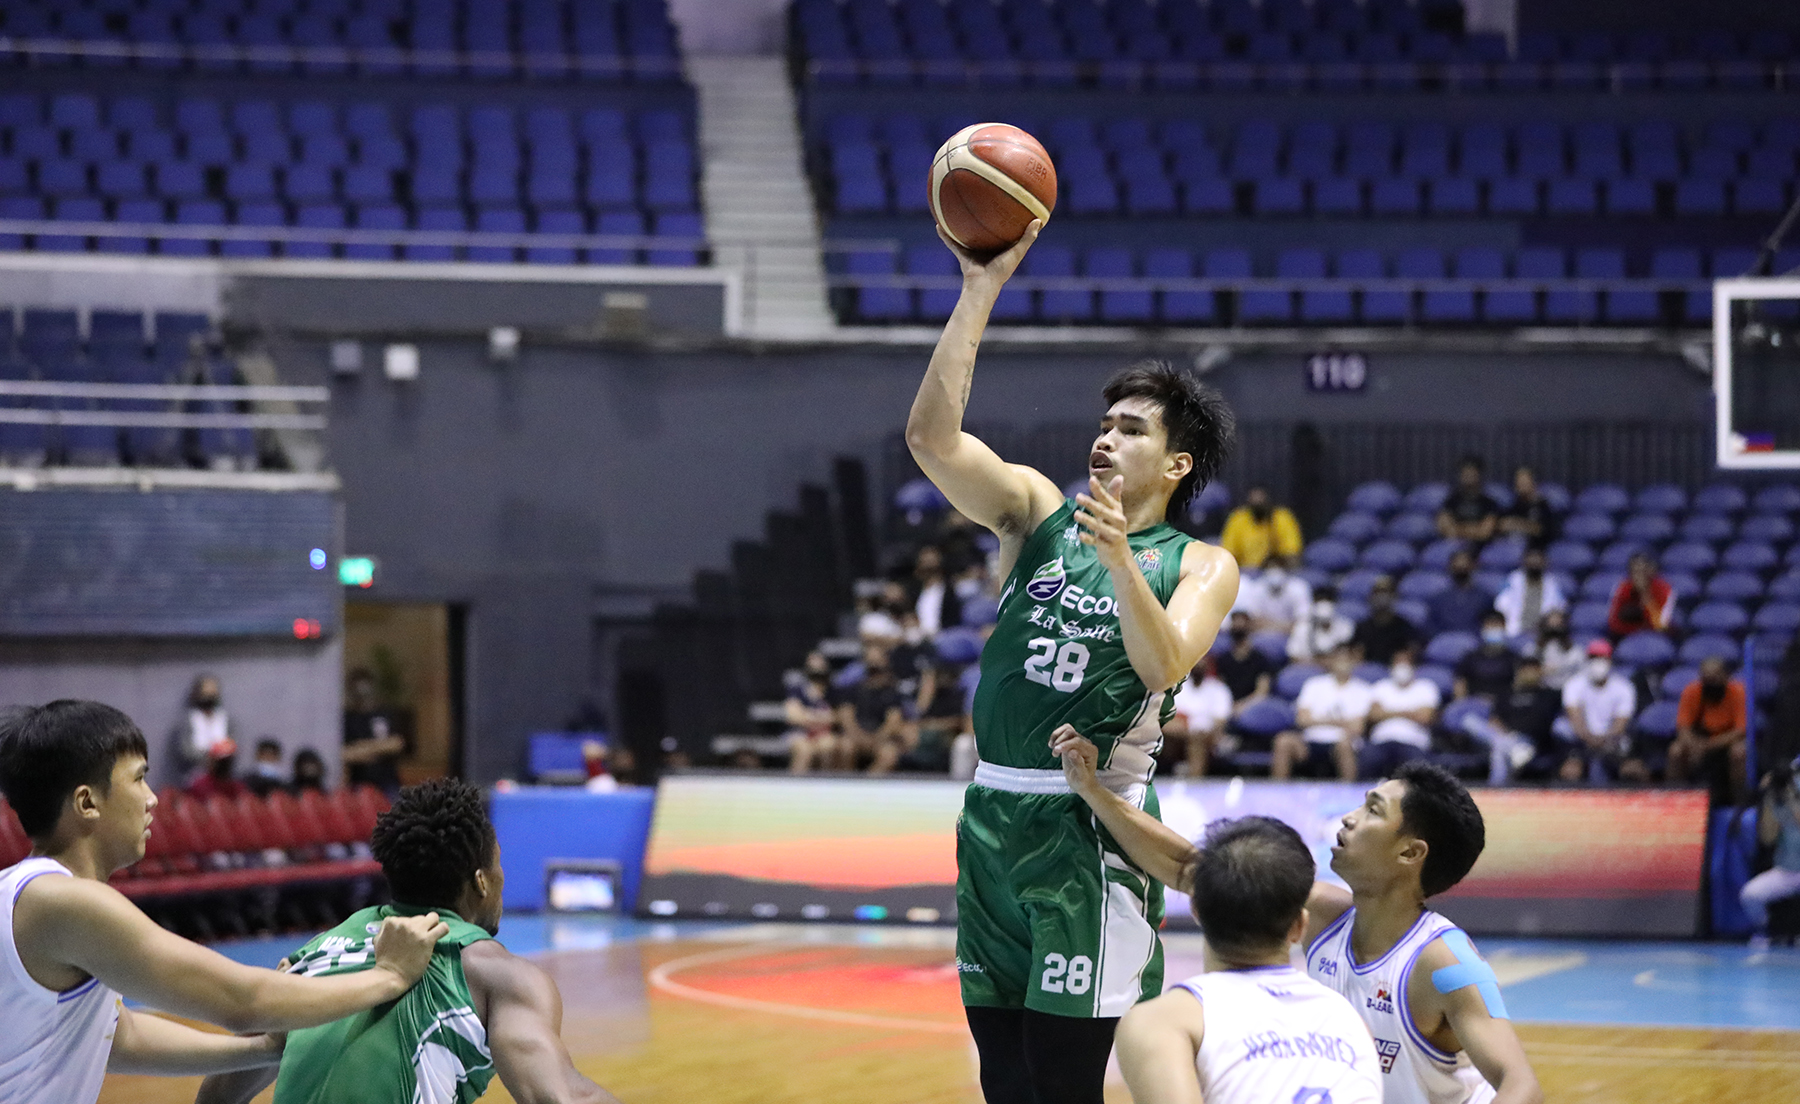 EcOoil La Salle's Kevin Quiambao in the PBA D-League finals Game 2.